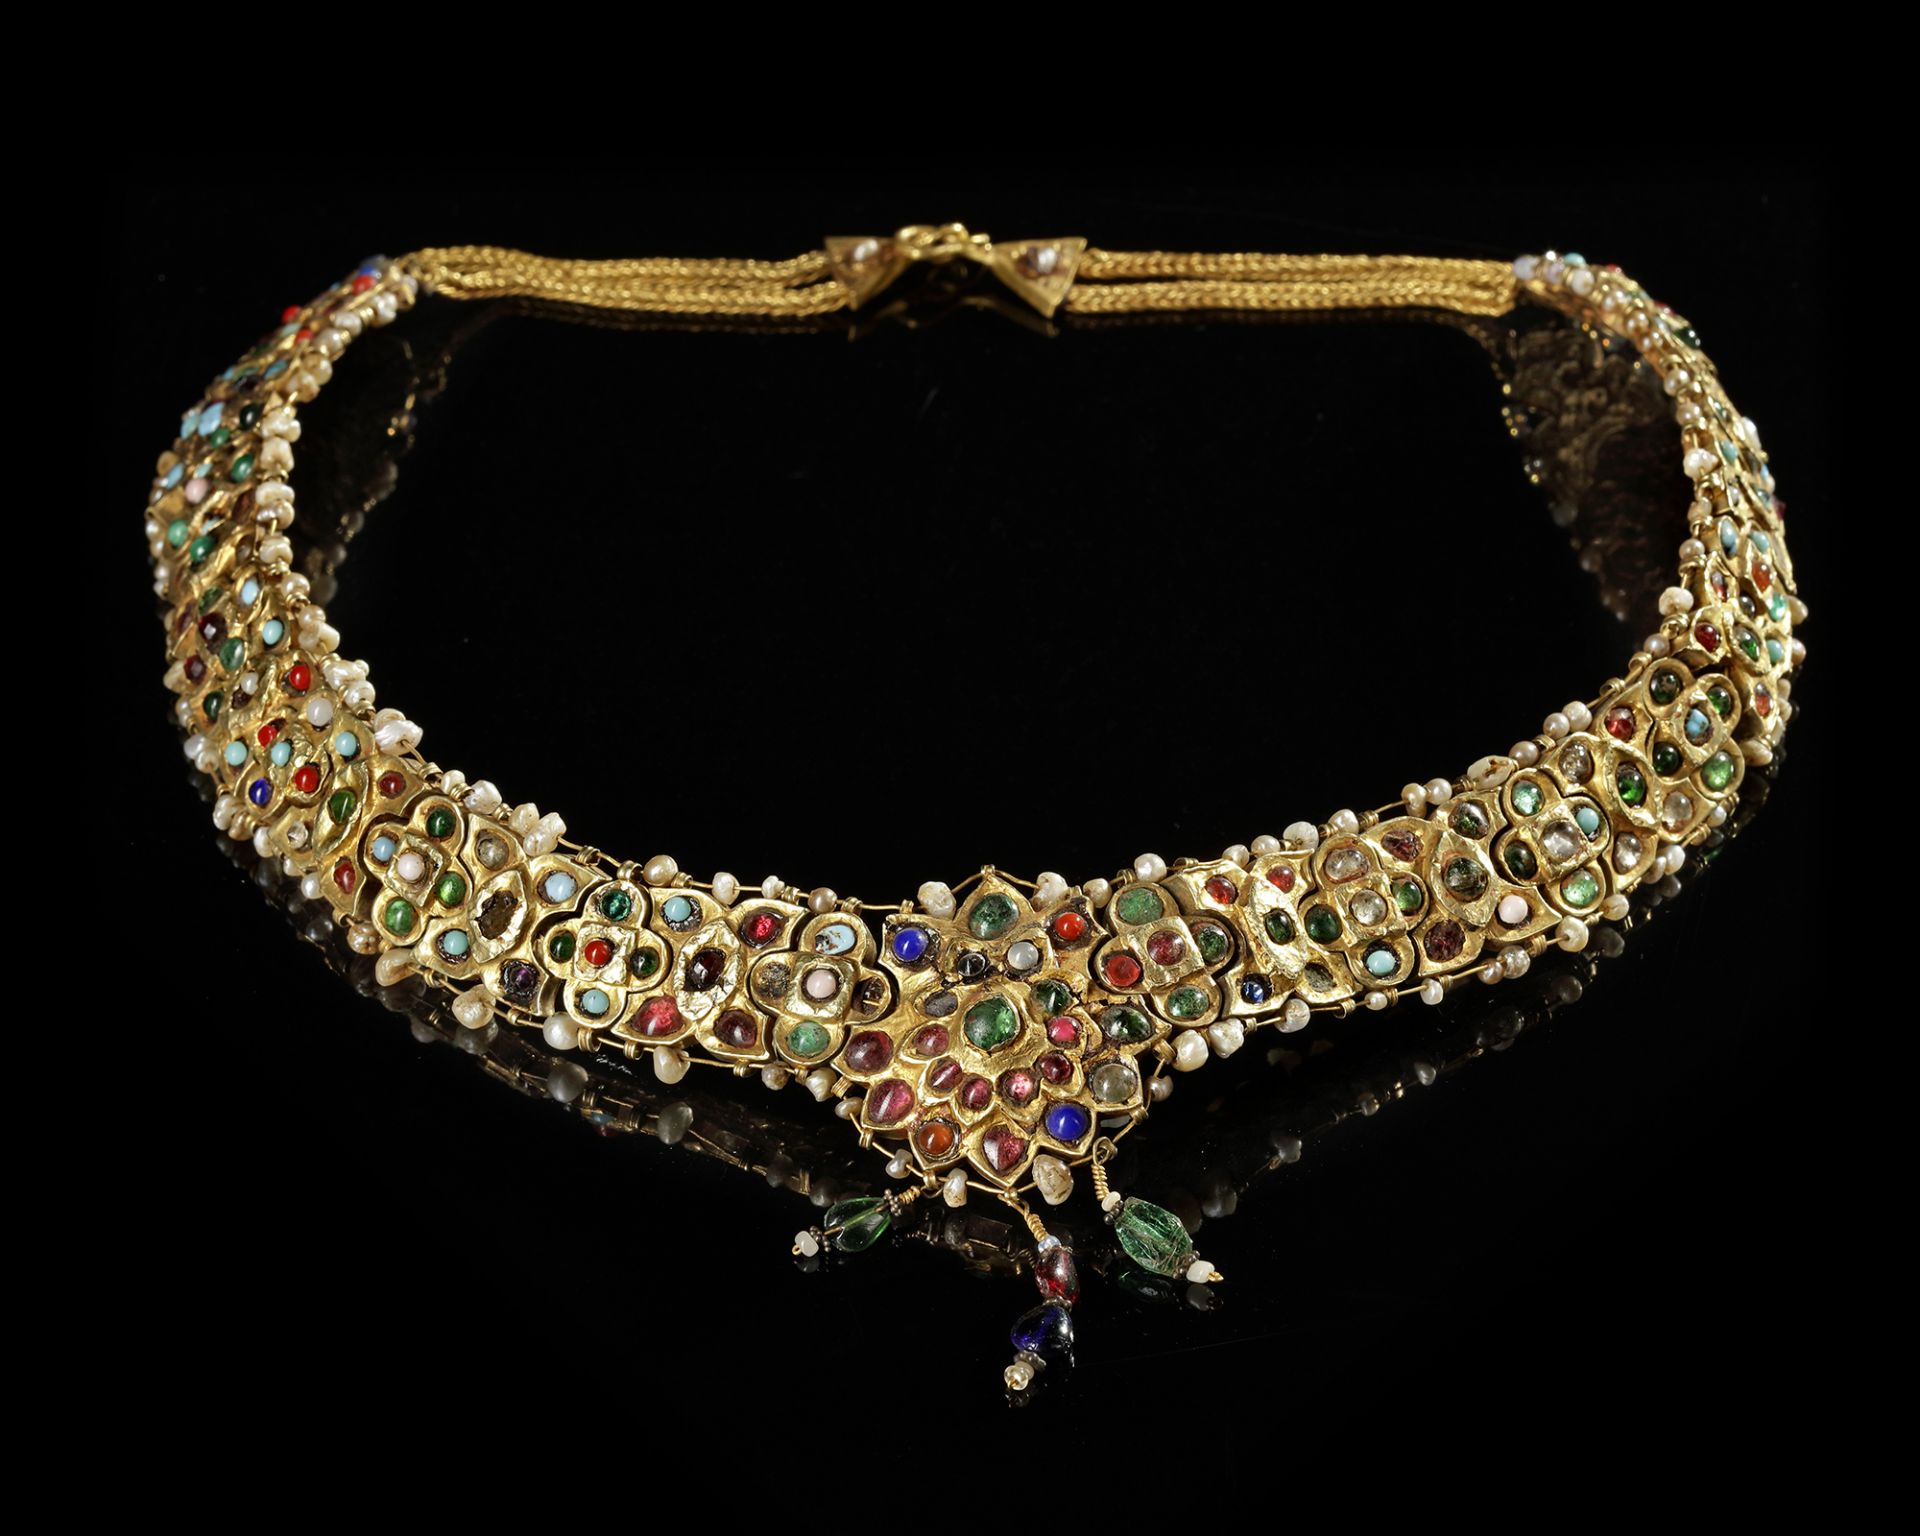 A MUGHAL GEM-SET ENAMELED GOLD NECKLACE, LATE 18TH CENTURY - Image 3 of 8